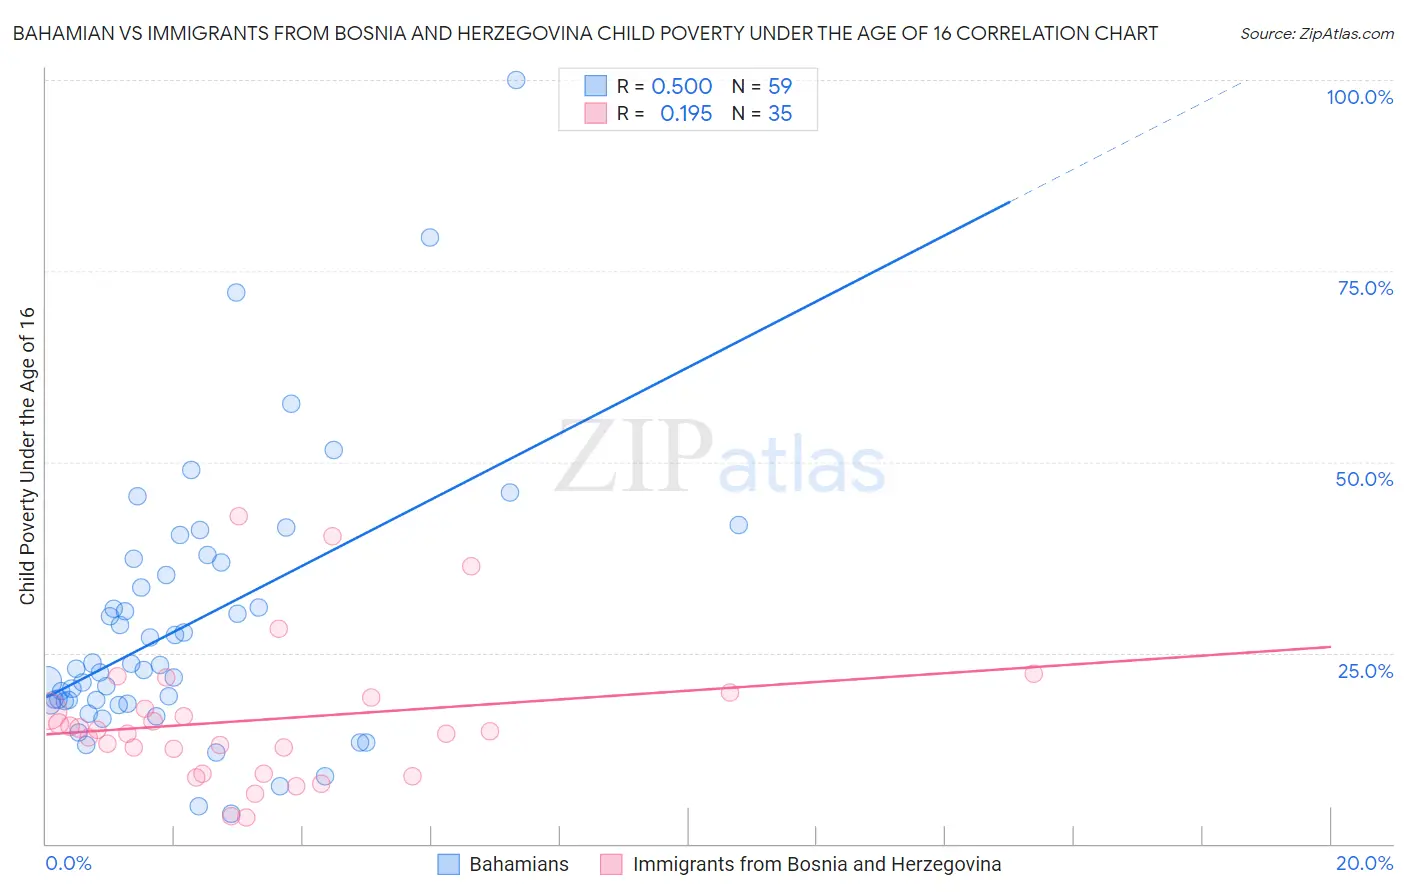 Bahamian vs Immigrants from Bosnia and Herzegovina Child Poverty Under the Age of 16